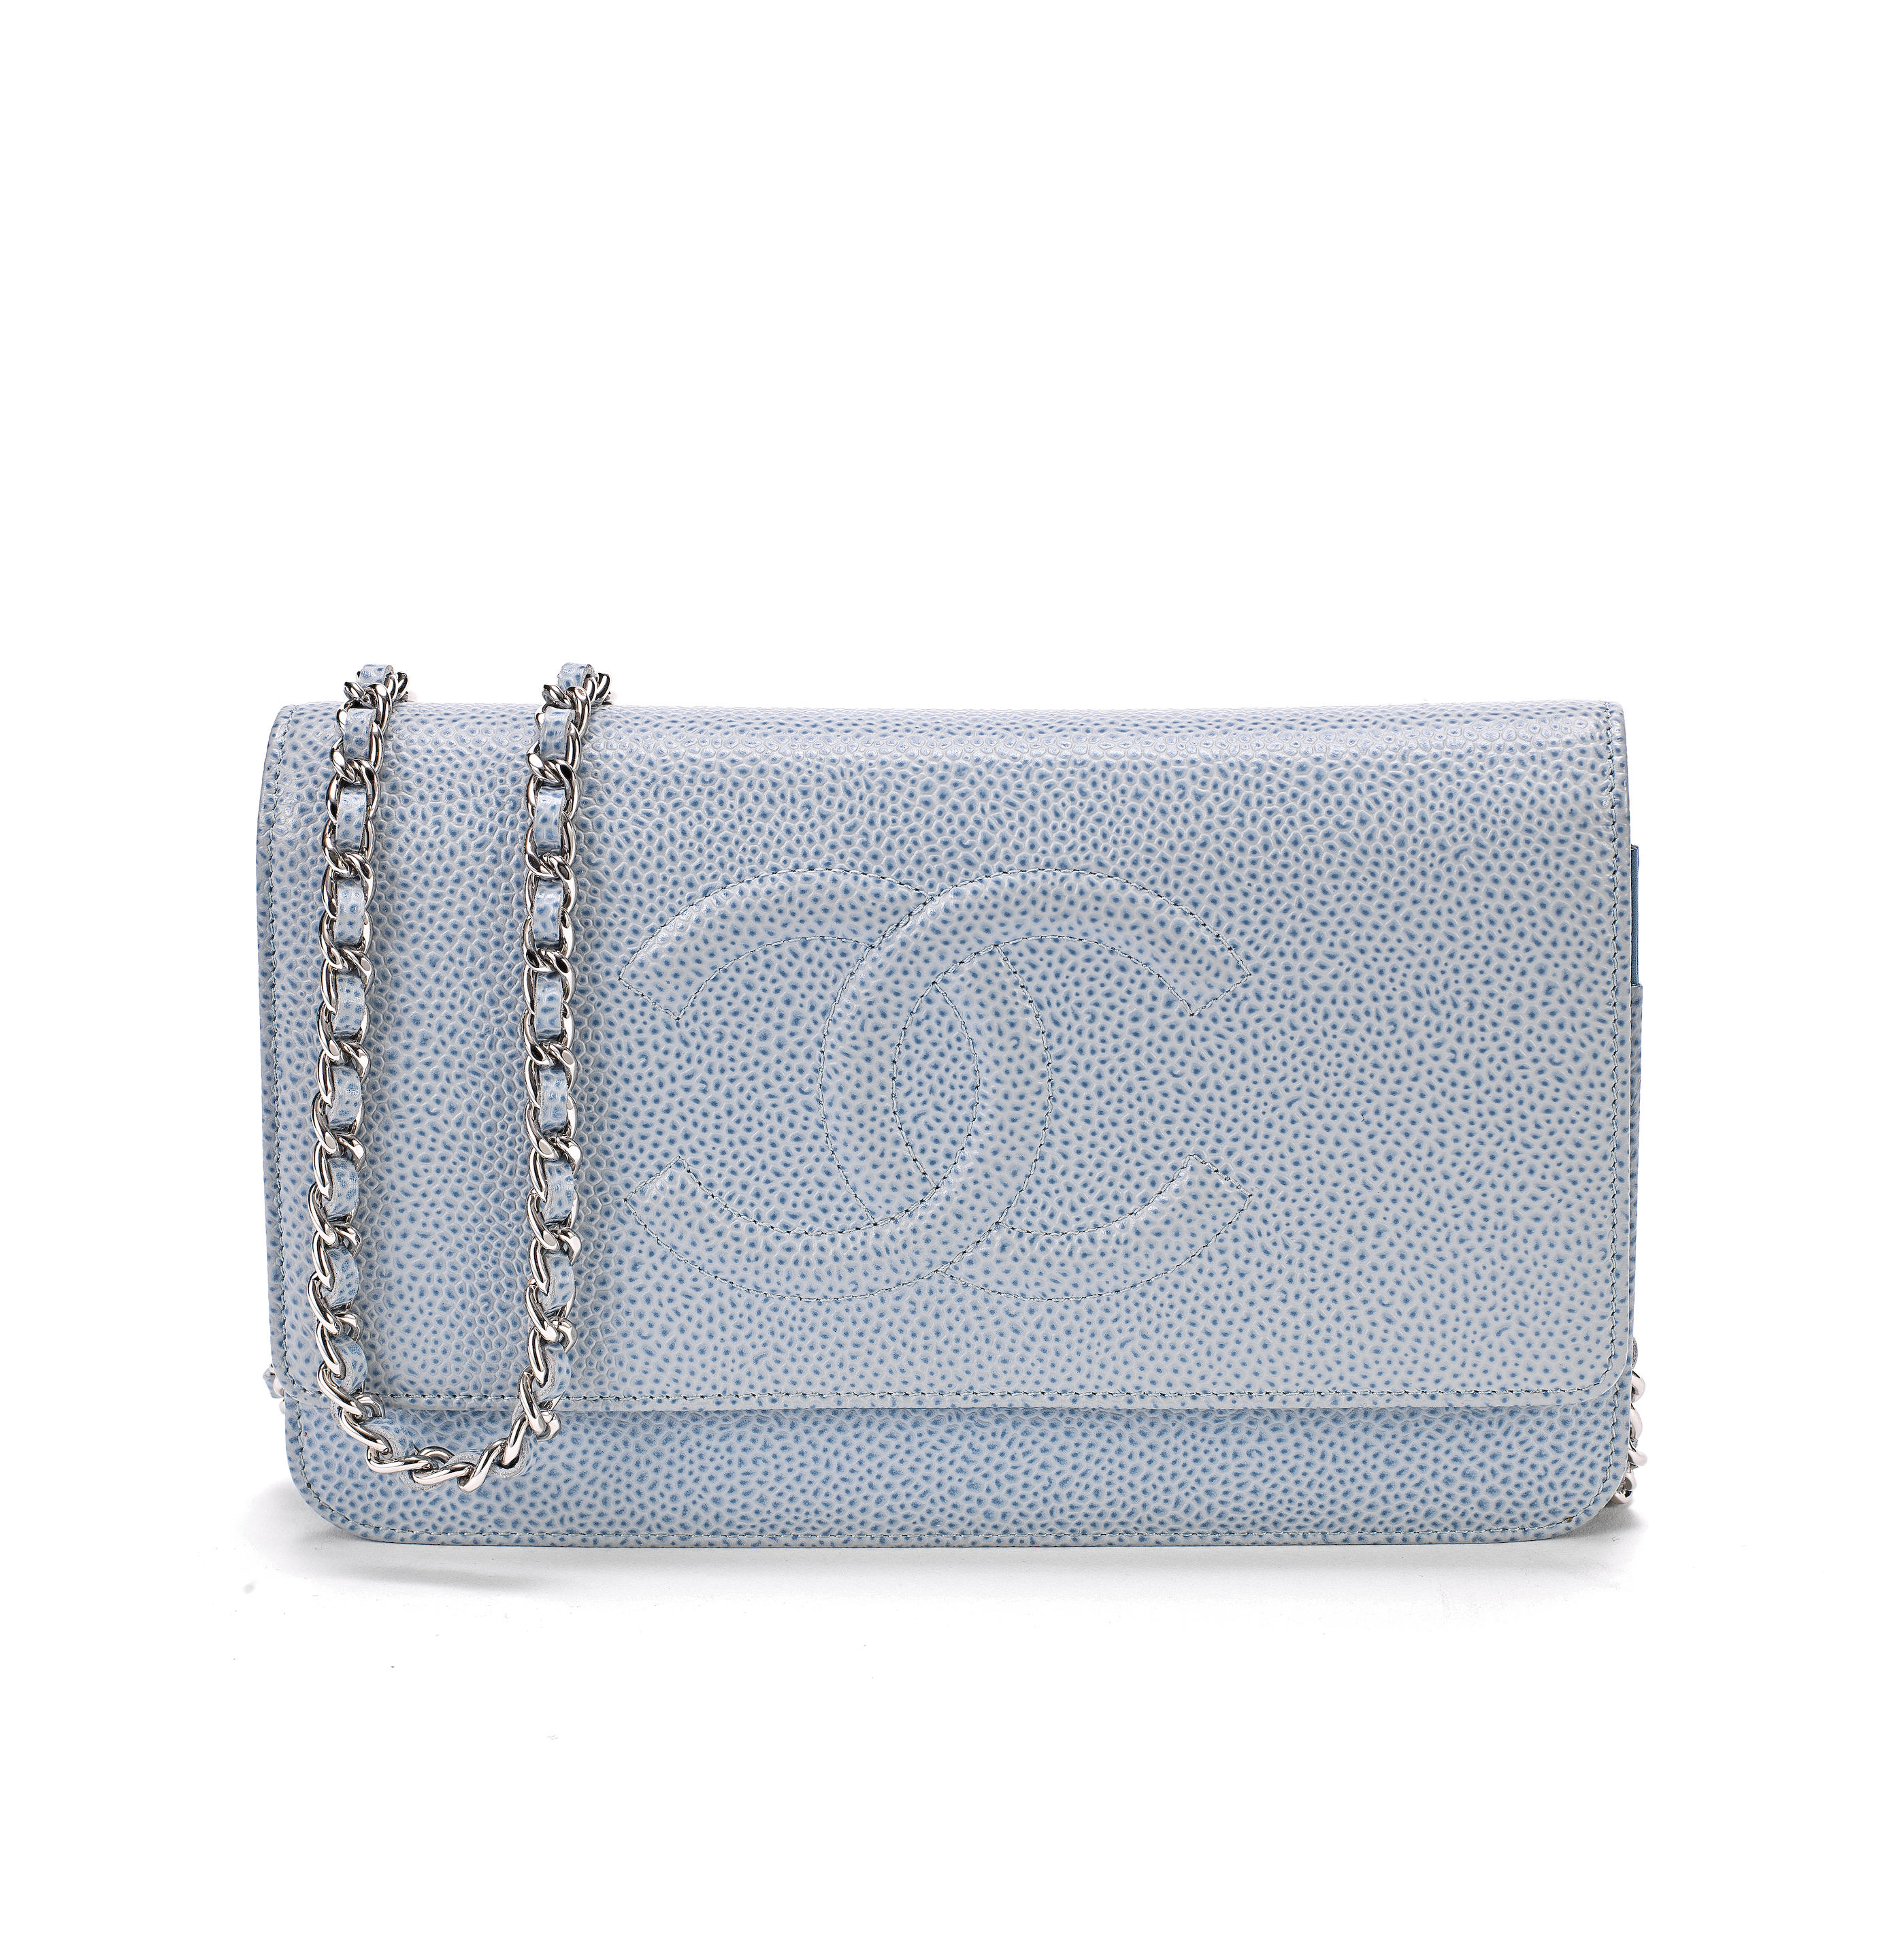 Bonhams : Chanel a Baby Blue Caviar Leather CC Wallet on Chain (WOC)  2012-13 (includes serial sticker, authenticity card and box)